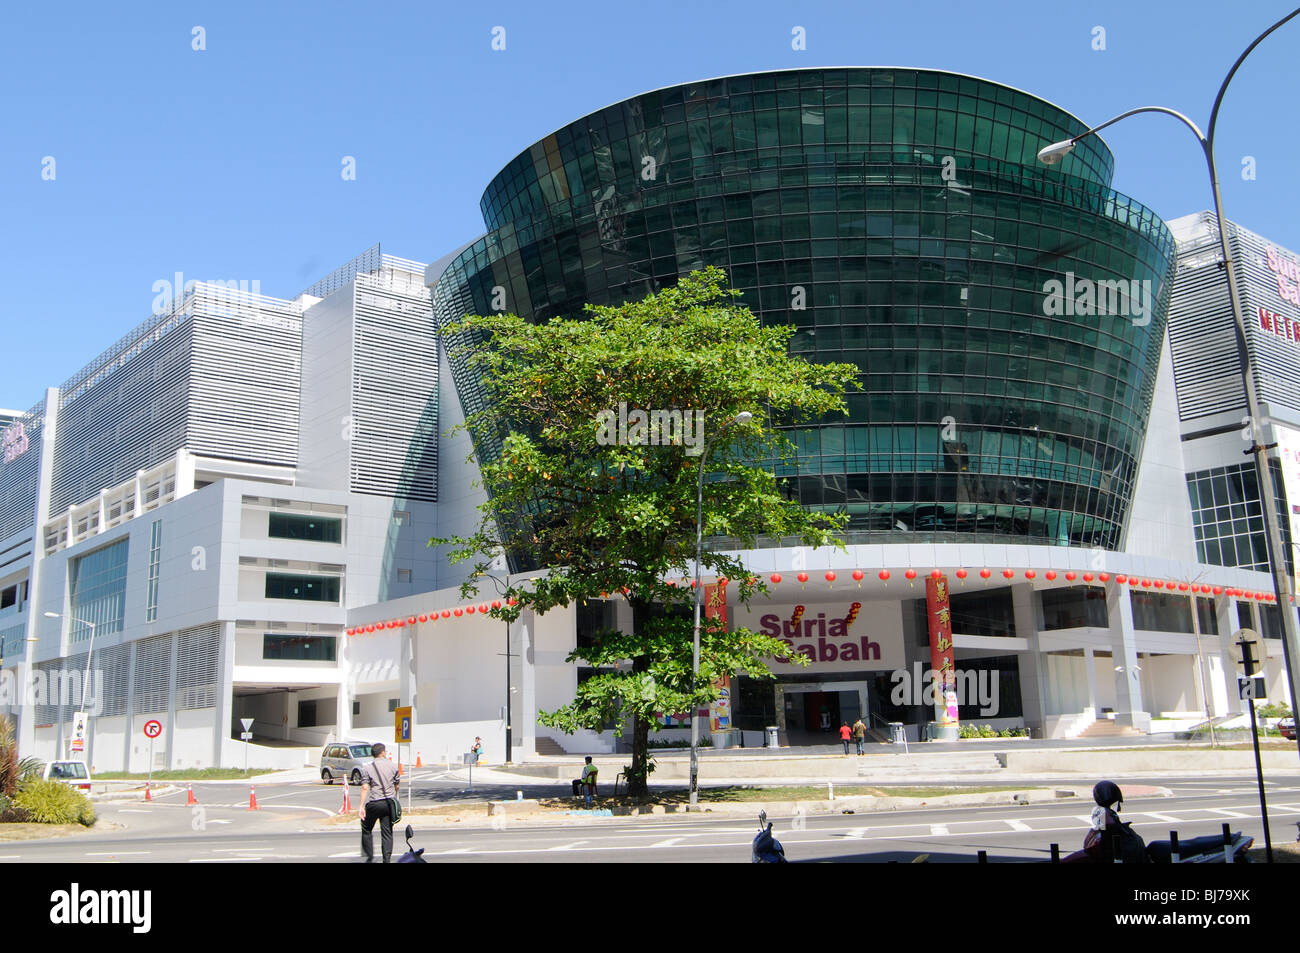 Suria Sabah High Resolution Stock Photography And Images Alamy